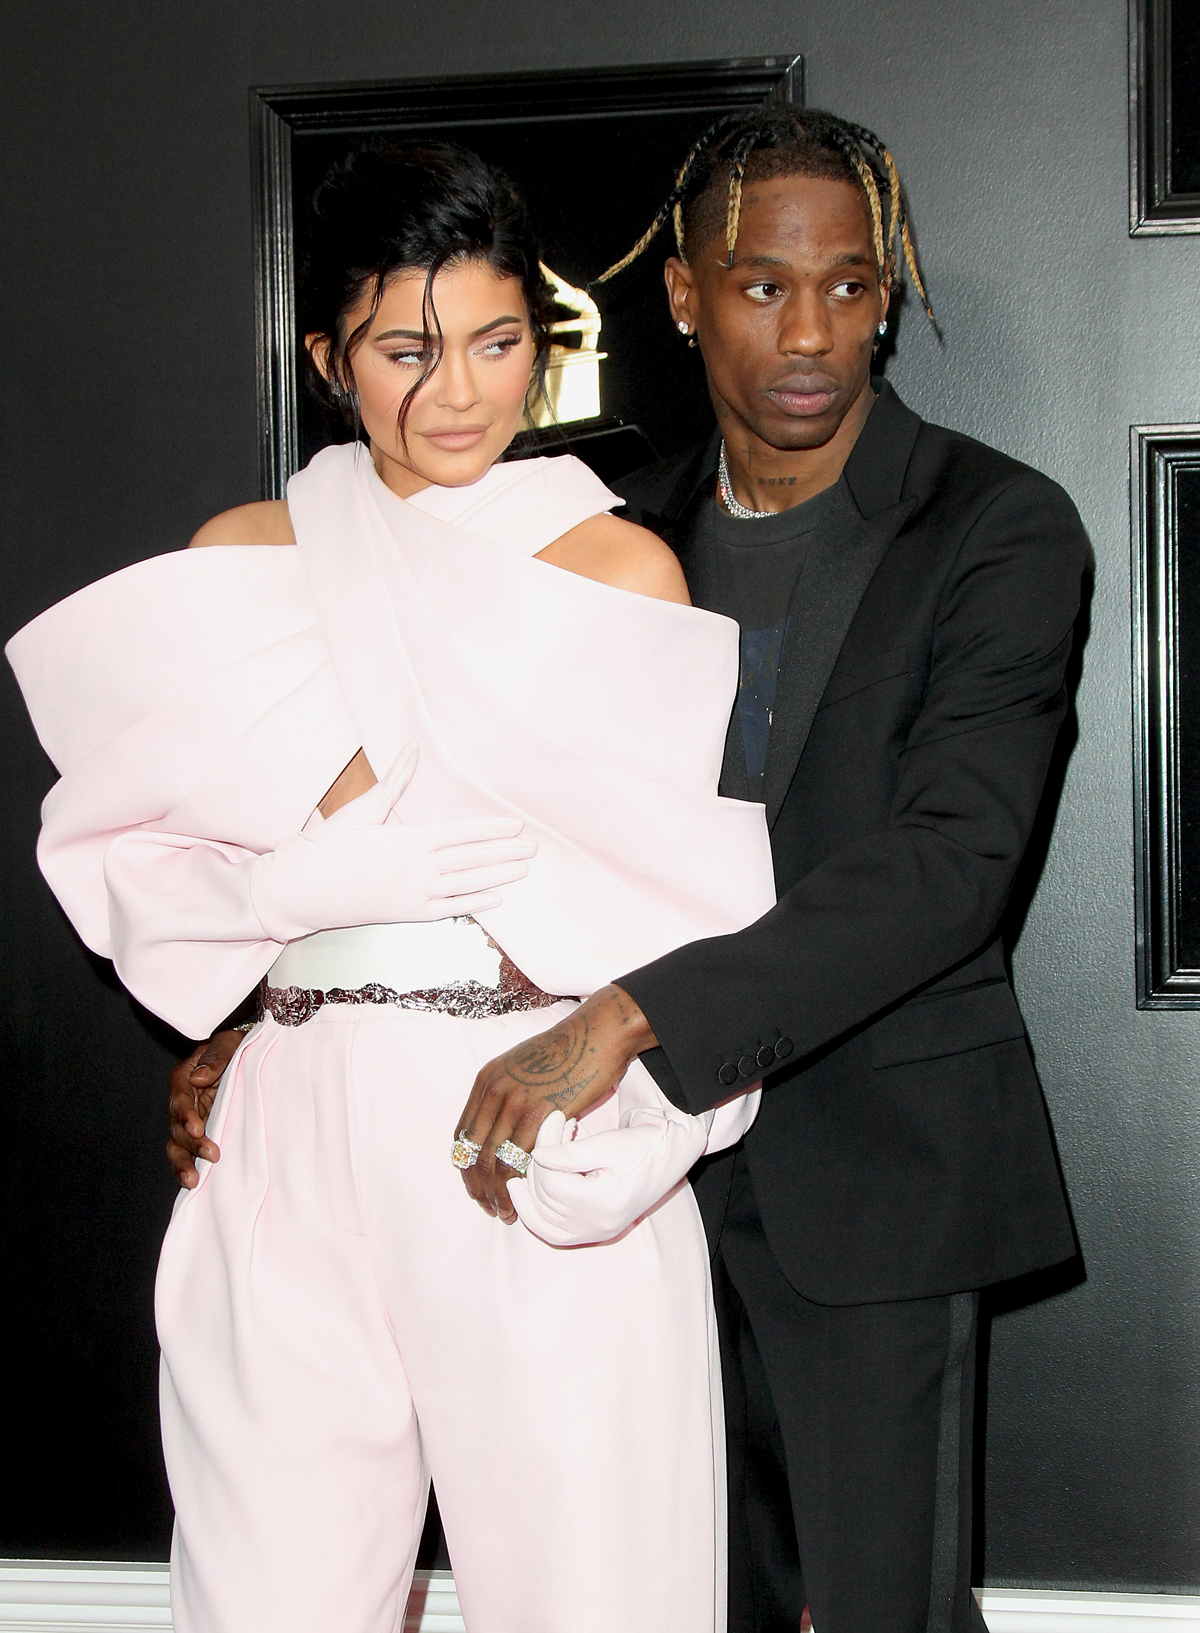 Drama for Kylie Jenner and Travis Scott!